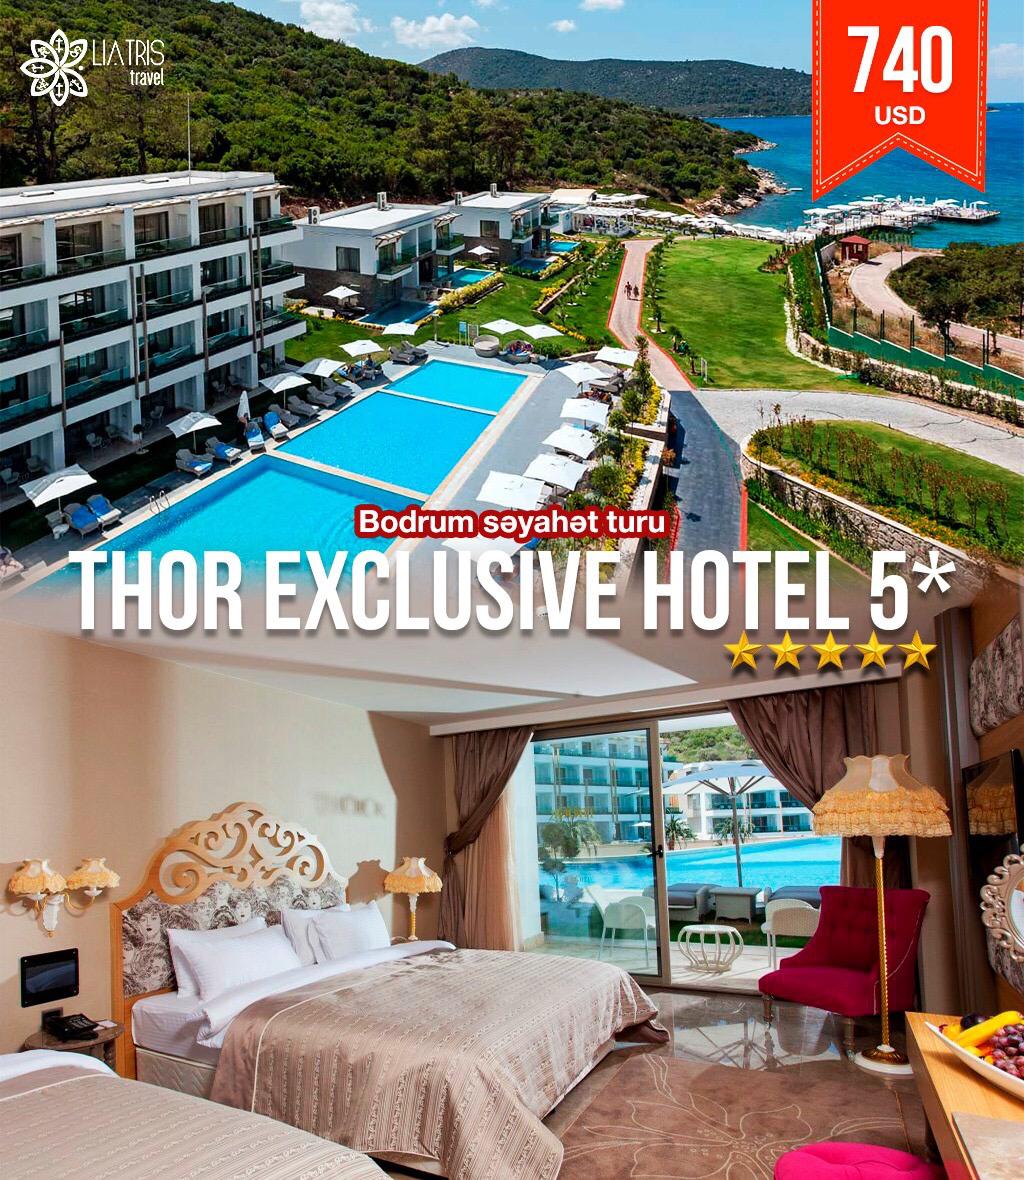 Thor Exclusive Hotel 5*